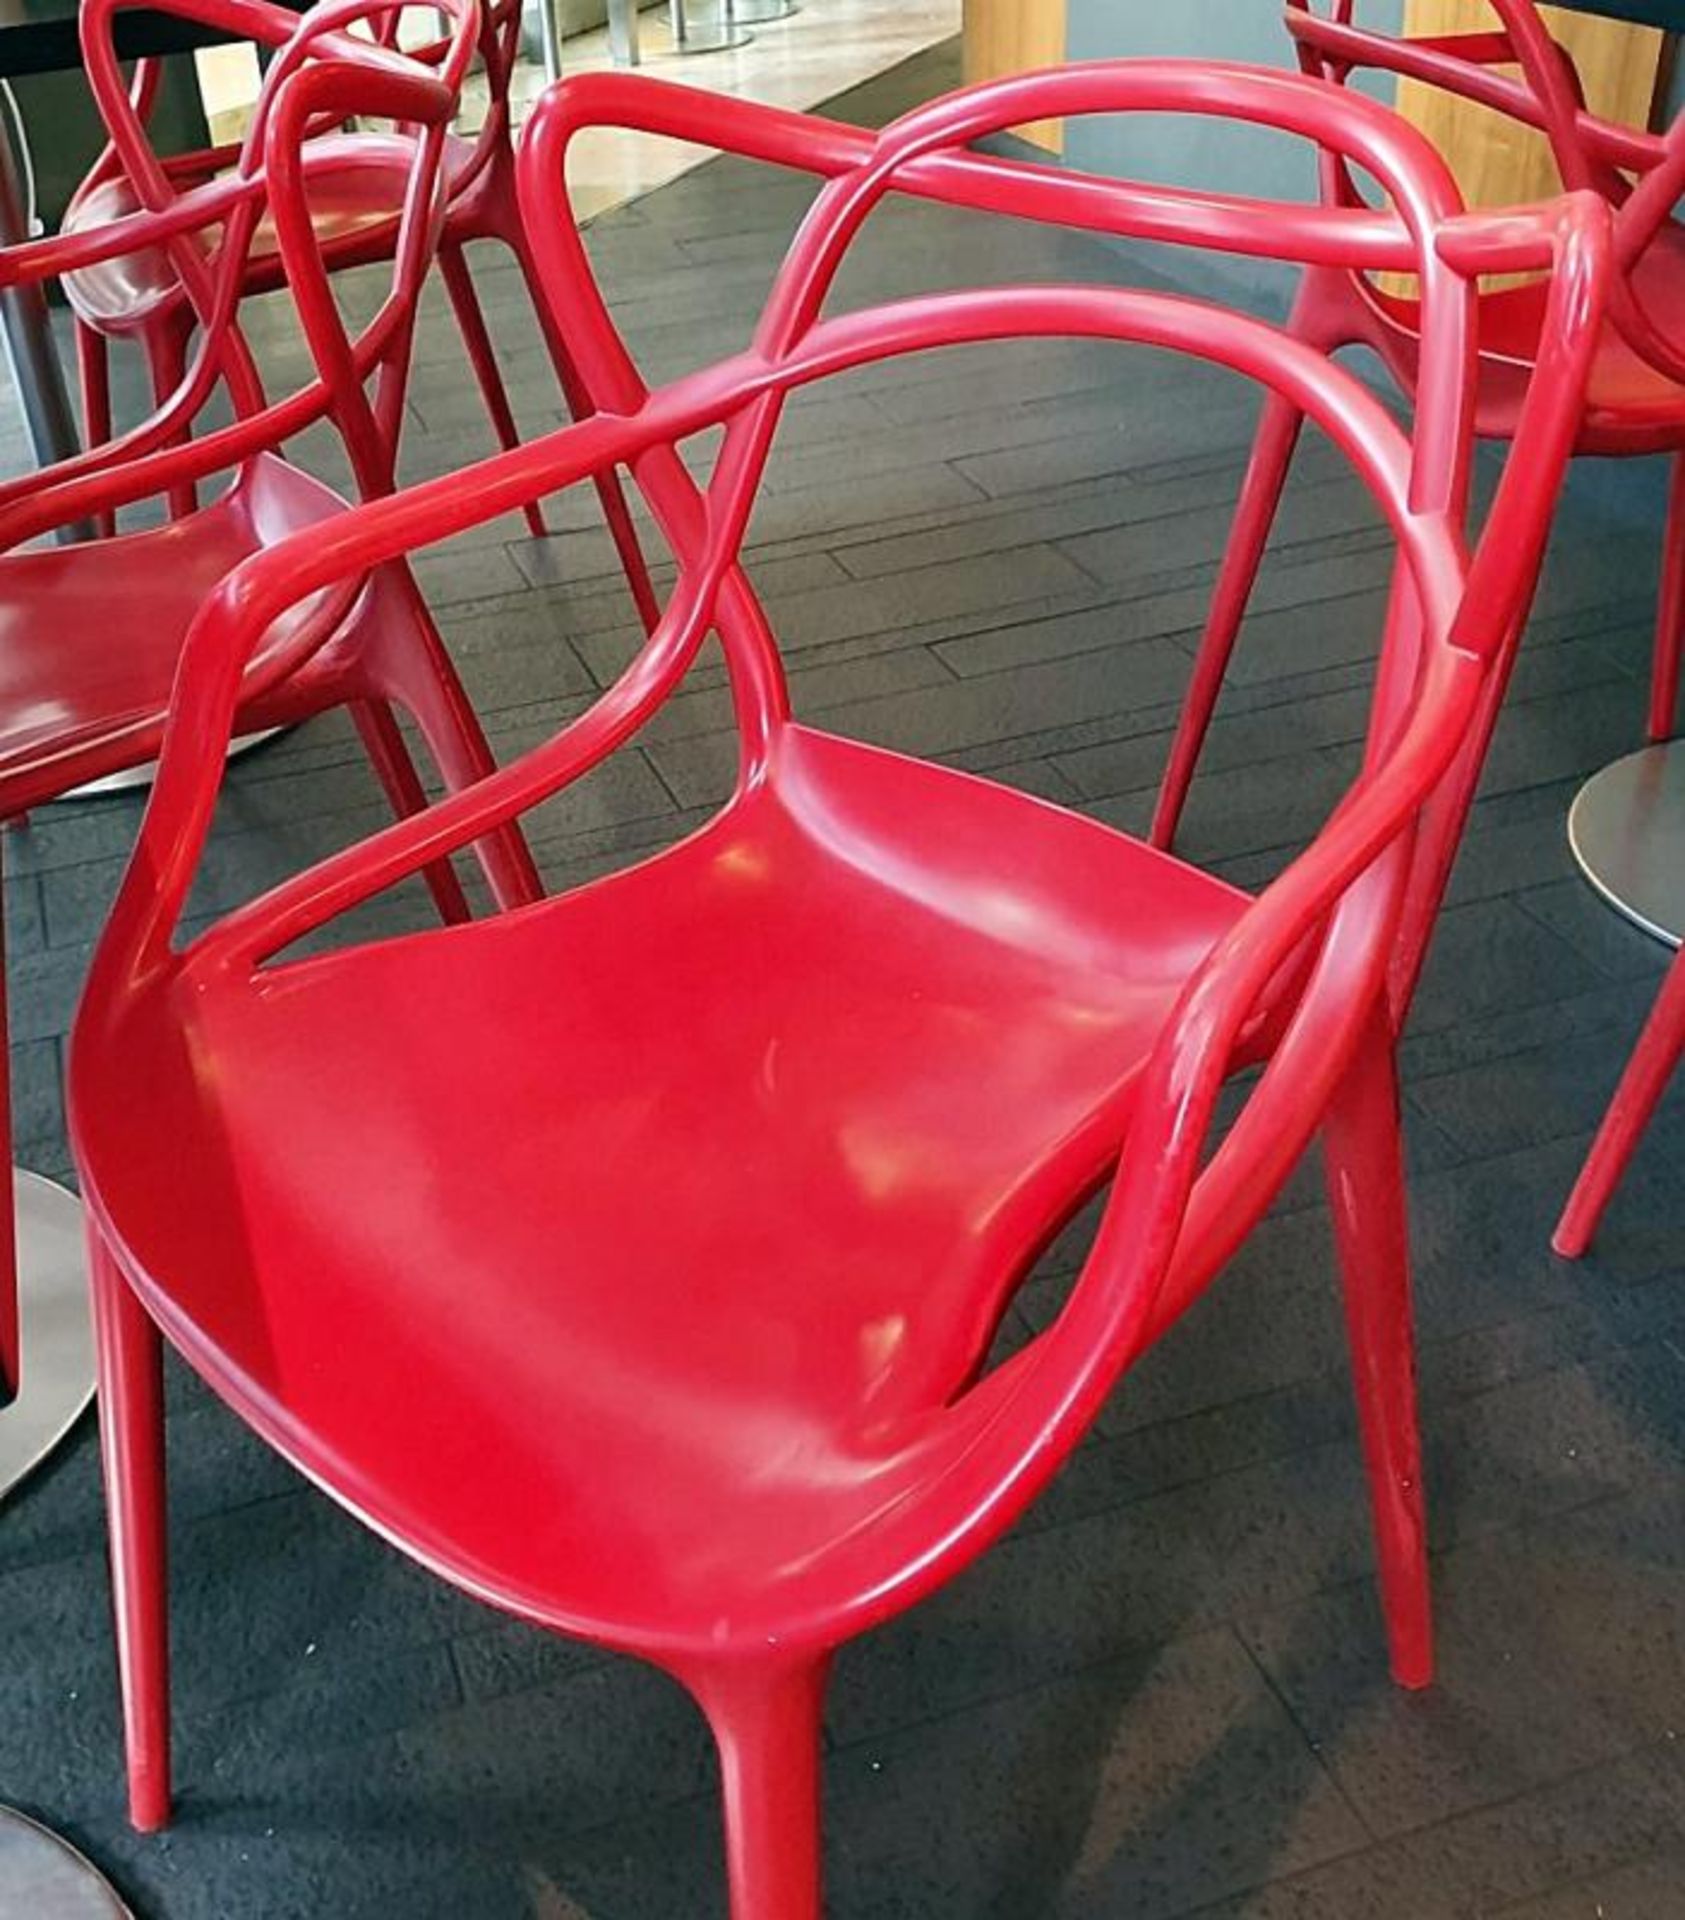 12 x Philippe Starck For Kartell 'Masters' Designer Bistro Chairs - Includes 10 x Red And 2 x Black - Image 5 of 6